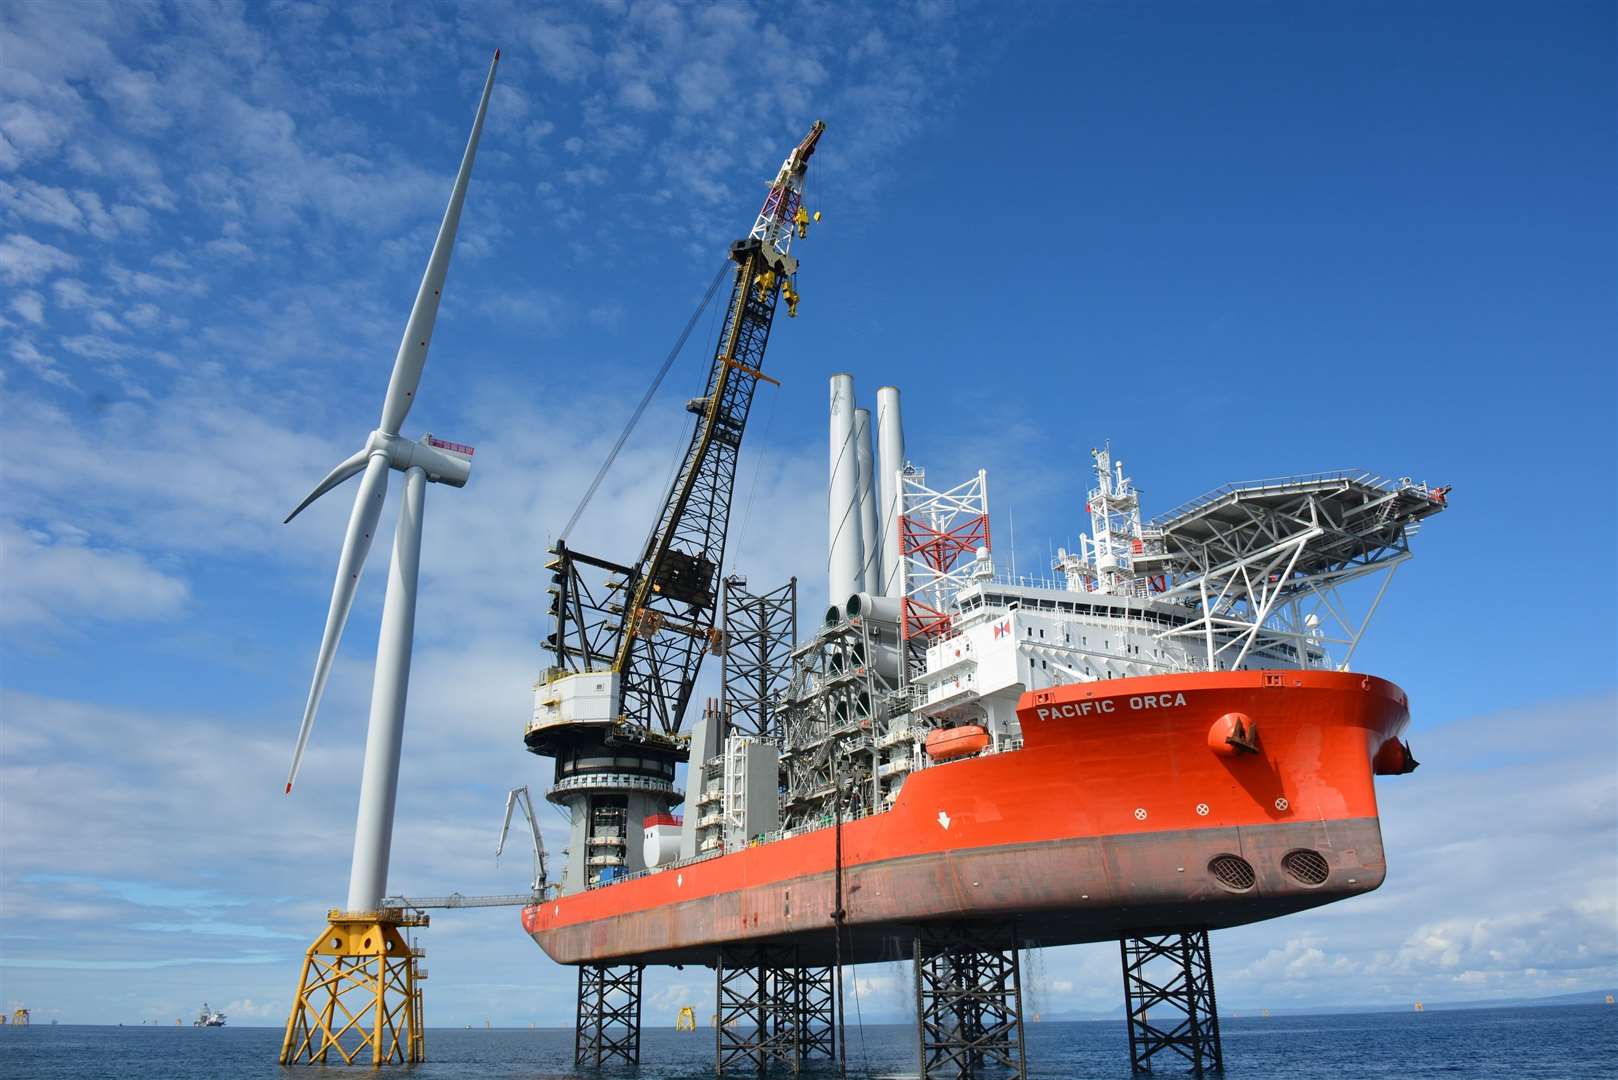 Construction in progress in July 2018 at the Beatrice offshore wind farm. Picture: Bowl